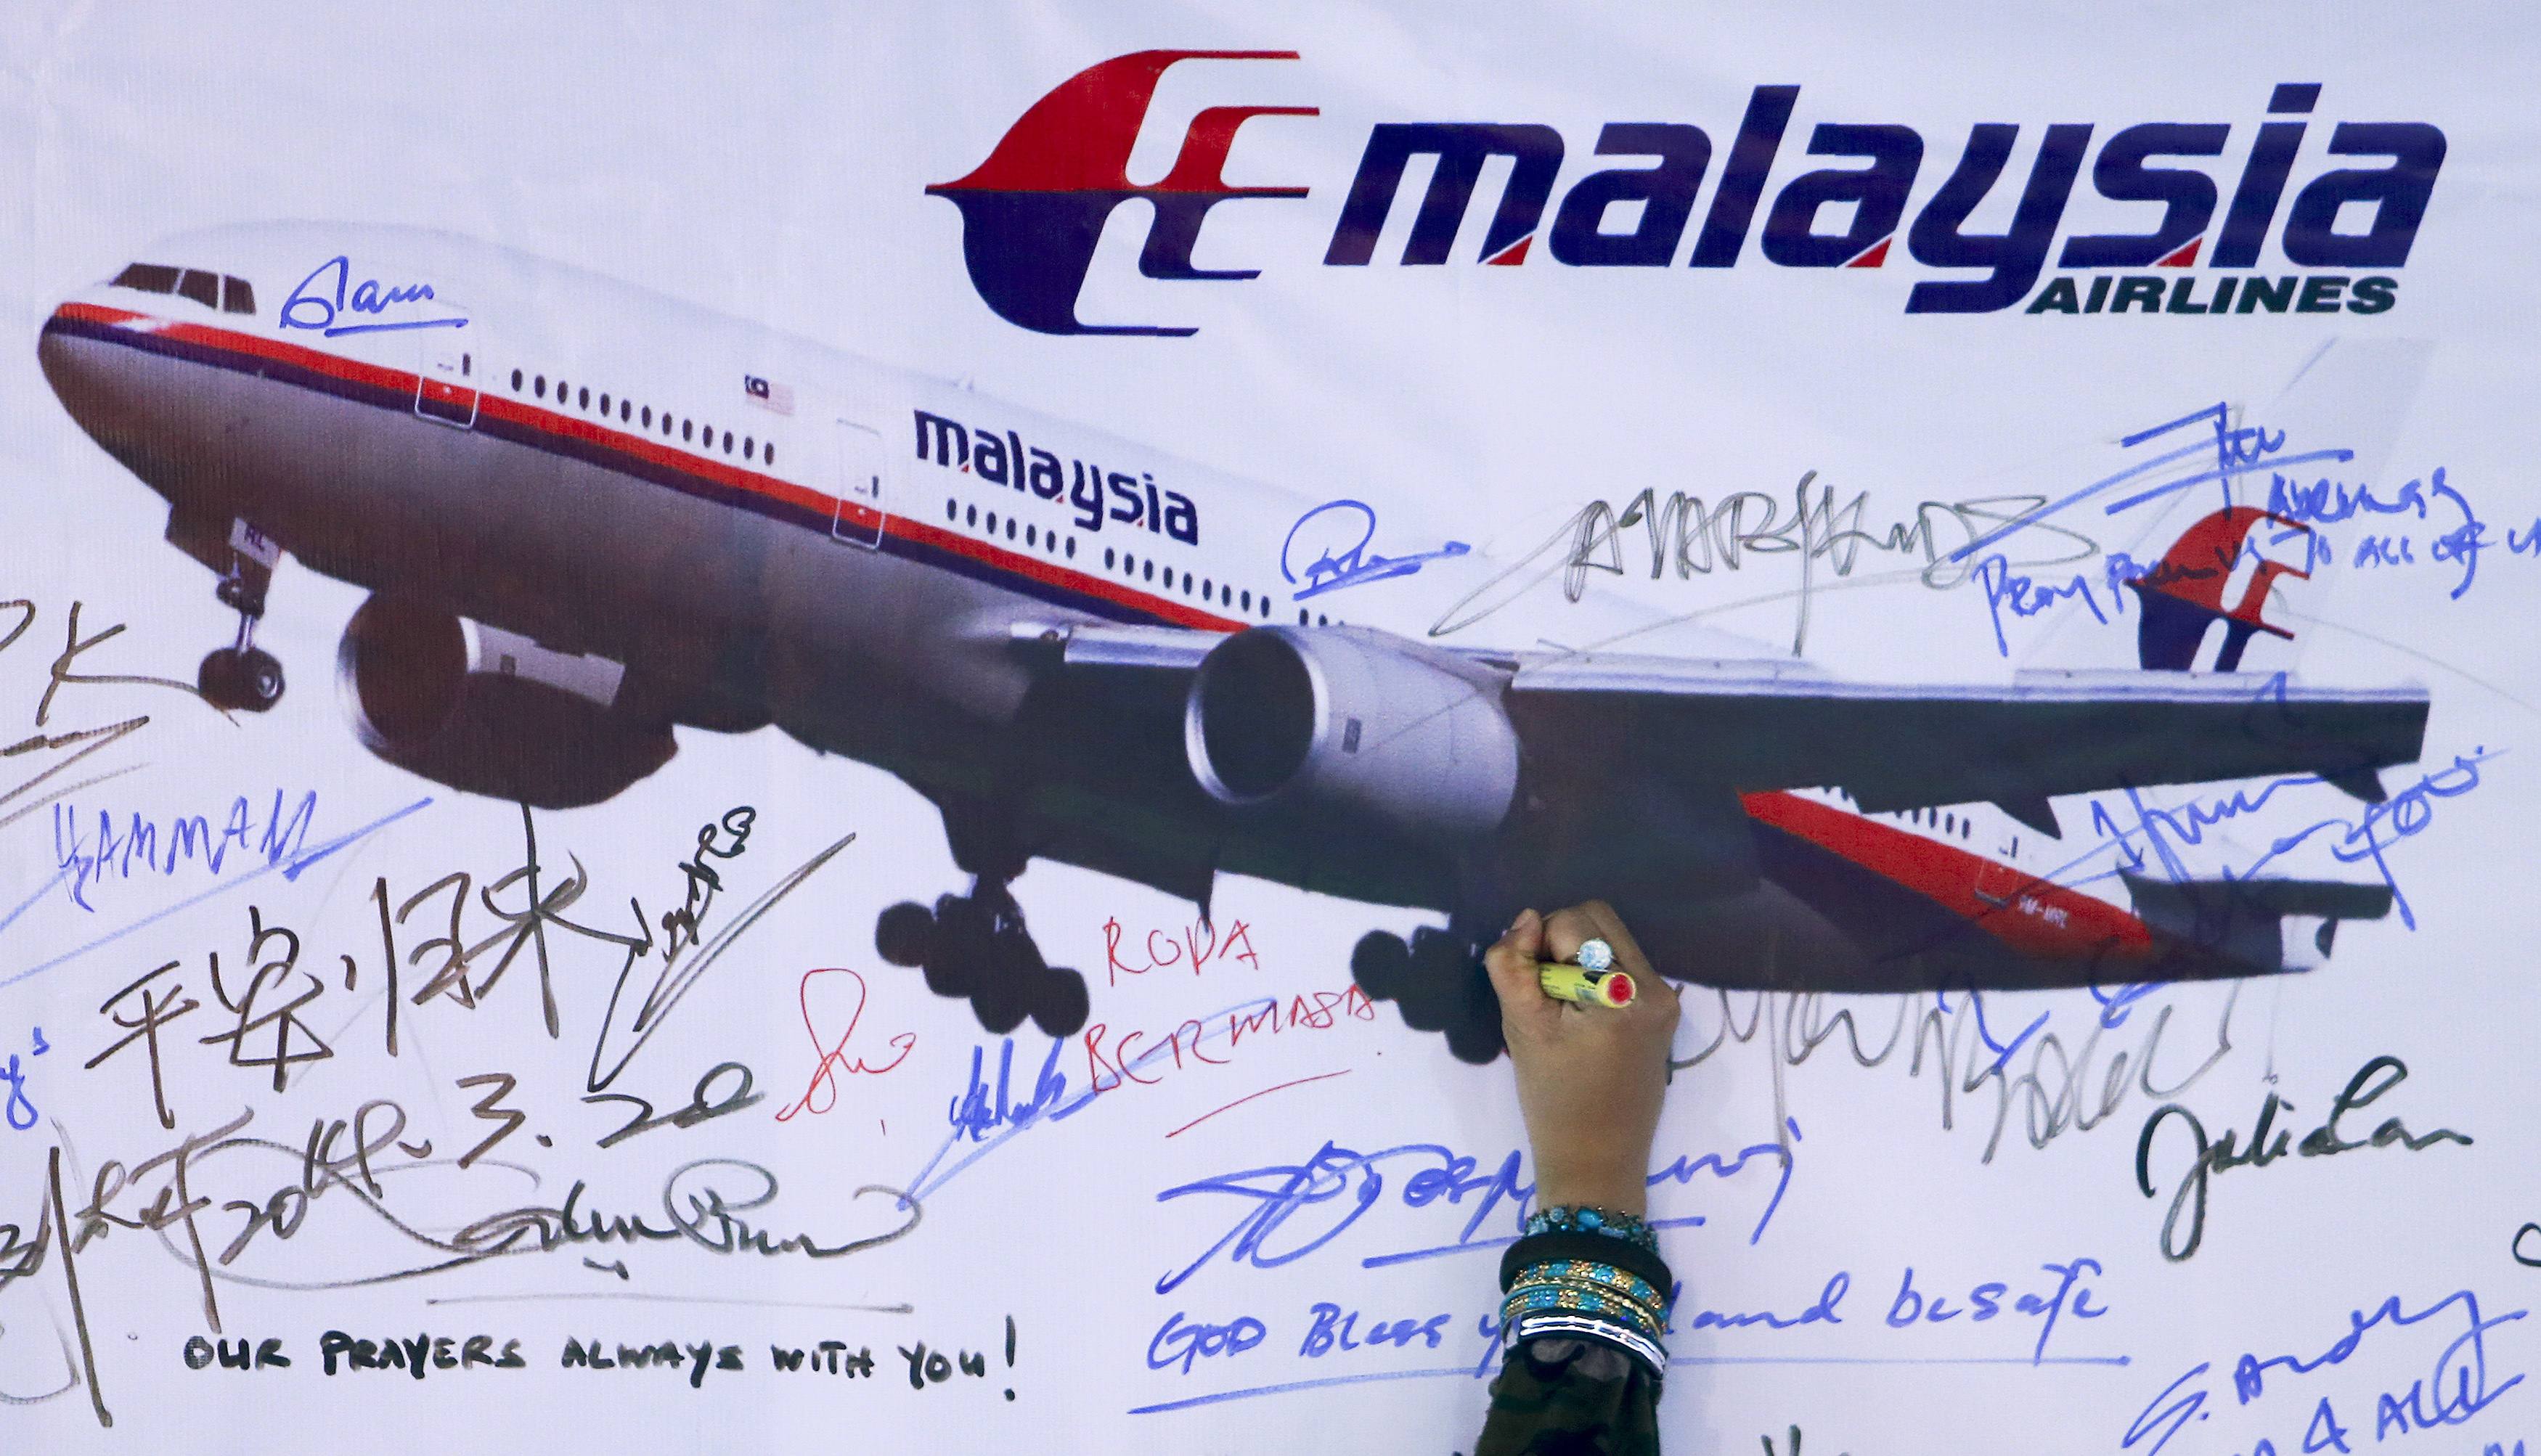 A woman writes a message on a board for passengers onboard missing Malaysia Airlines Flight MH370 and their family members, at Dataran Merdeka in Kuala Lumpur March 22, 2014. Two weeks after the airliner went missing with 239 people on board, officials are bracing for the "long haul" as searches by more than two dozen countries turn up little but frustration and fresh questions. REUTERS/Samsul Said (MALAYSIA - Tags: DISASTER TRANSPORT)